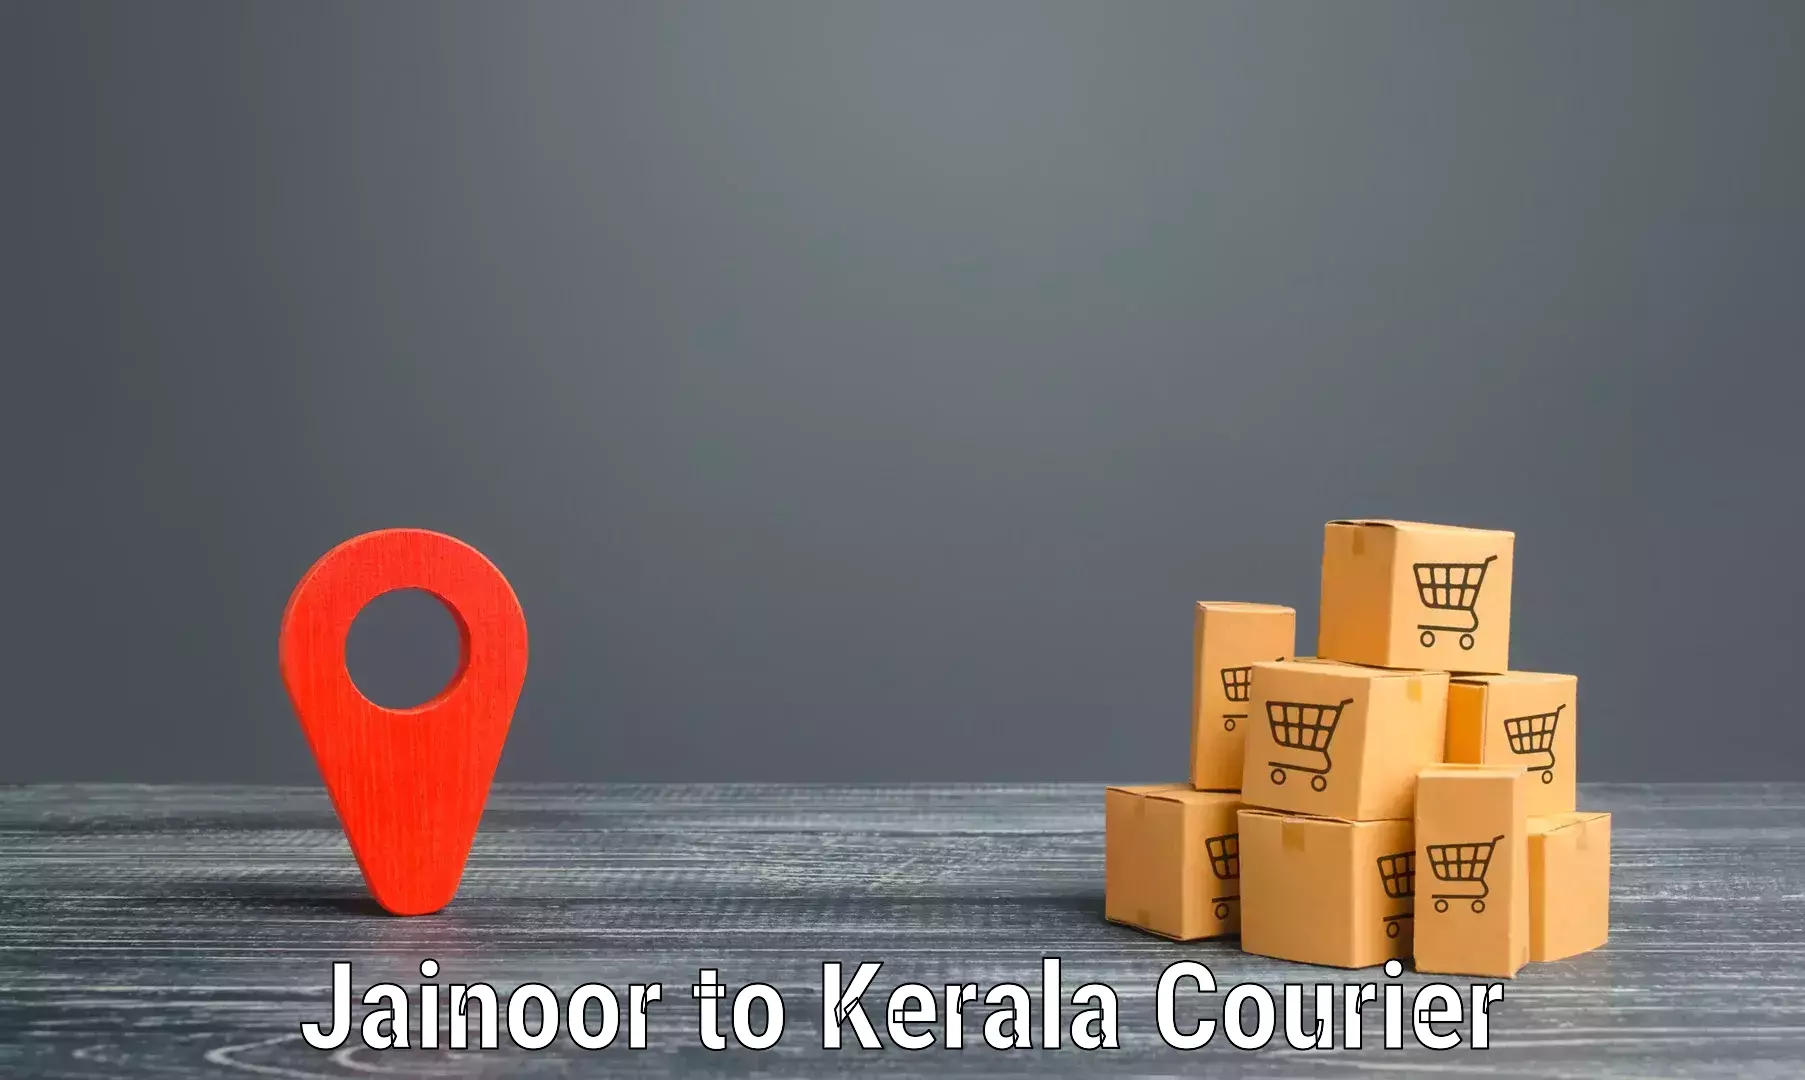 Quick dispatch service Jainoor to Cochin University of Science and Technology